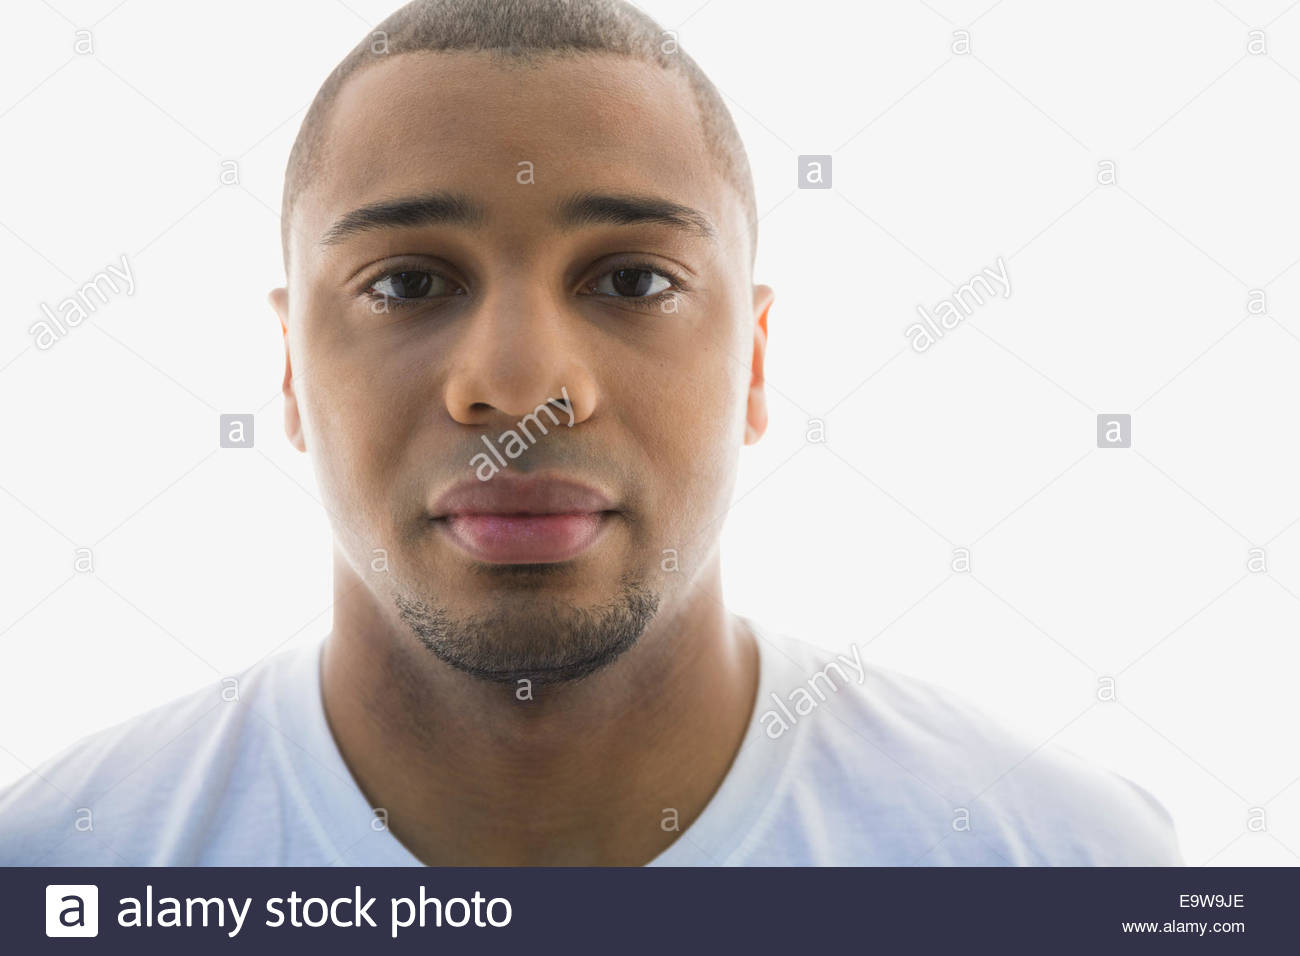 Close up portrait of serious man Stock Photo